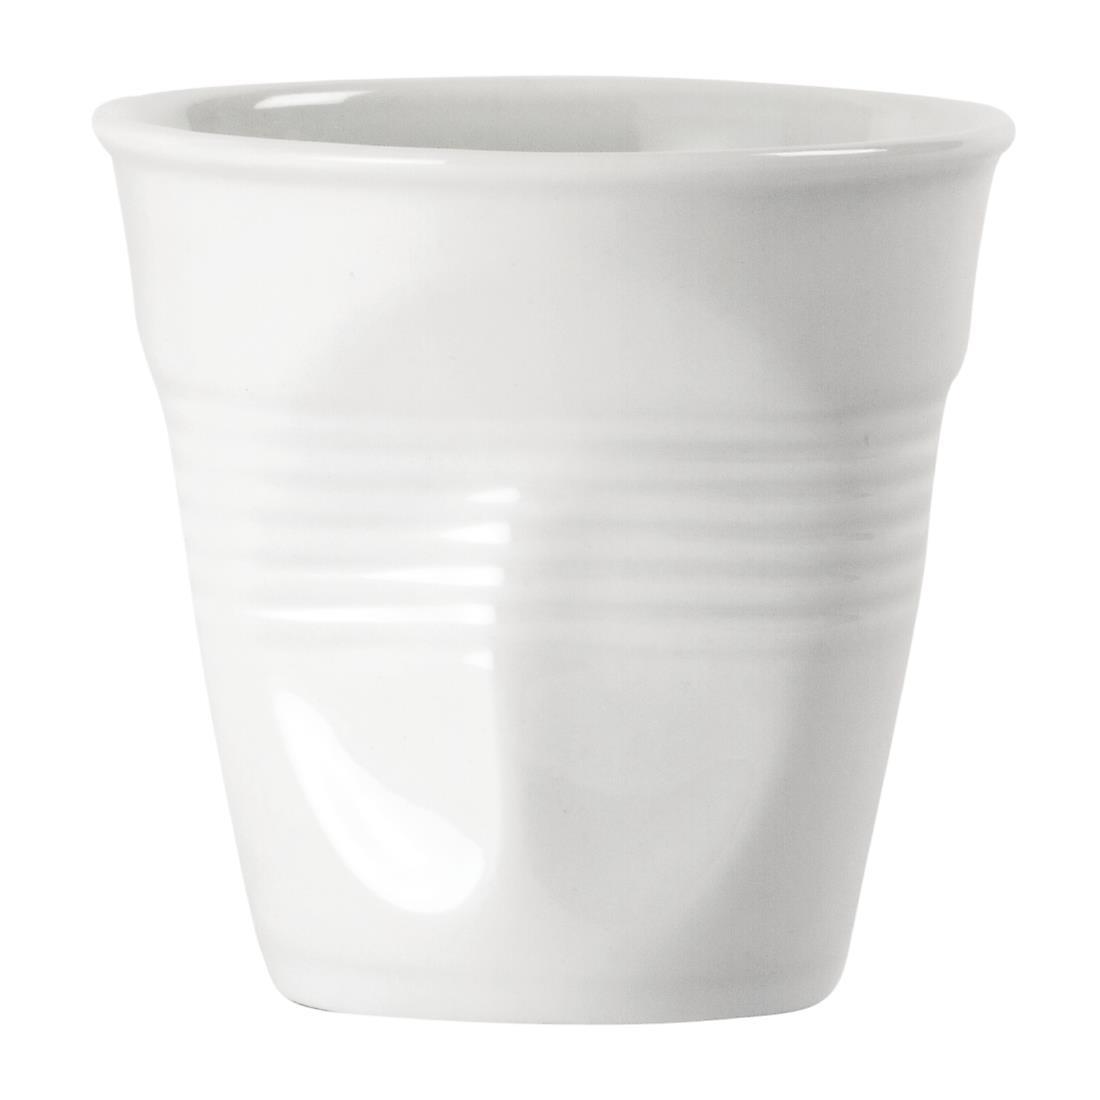 Revol Froisses Espresso Tumblers White 80ml (Pack of 6) - GD263  - 1